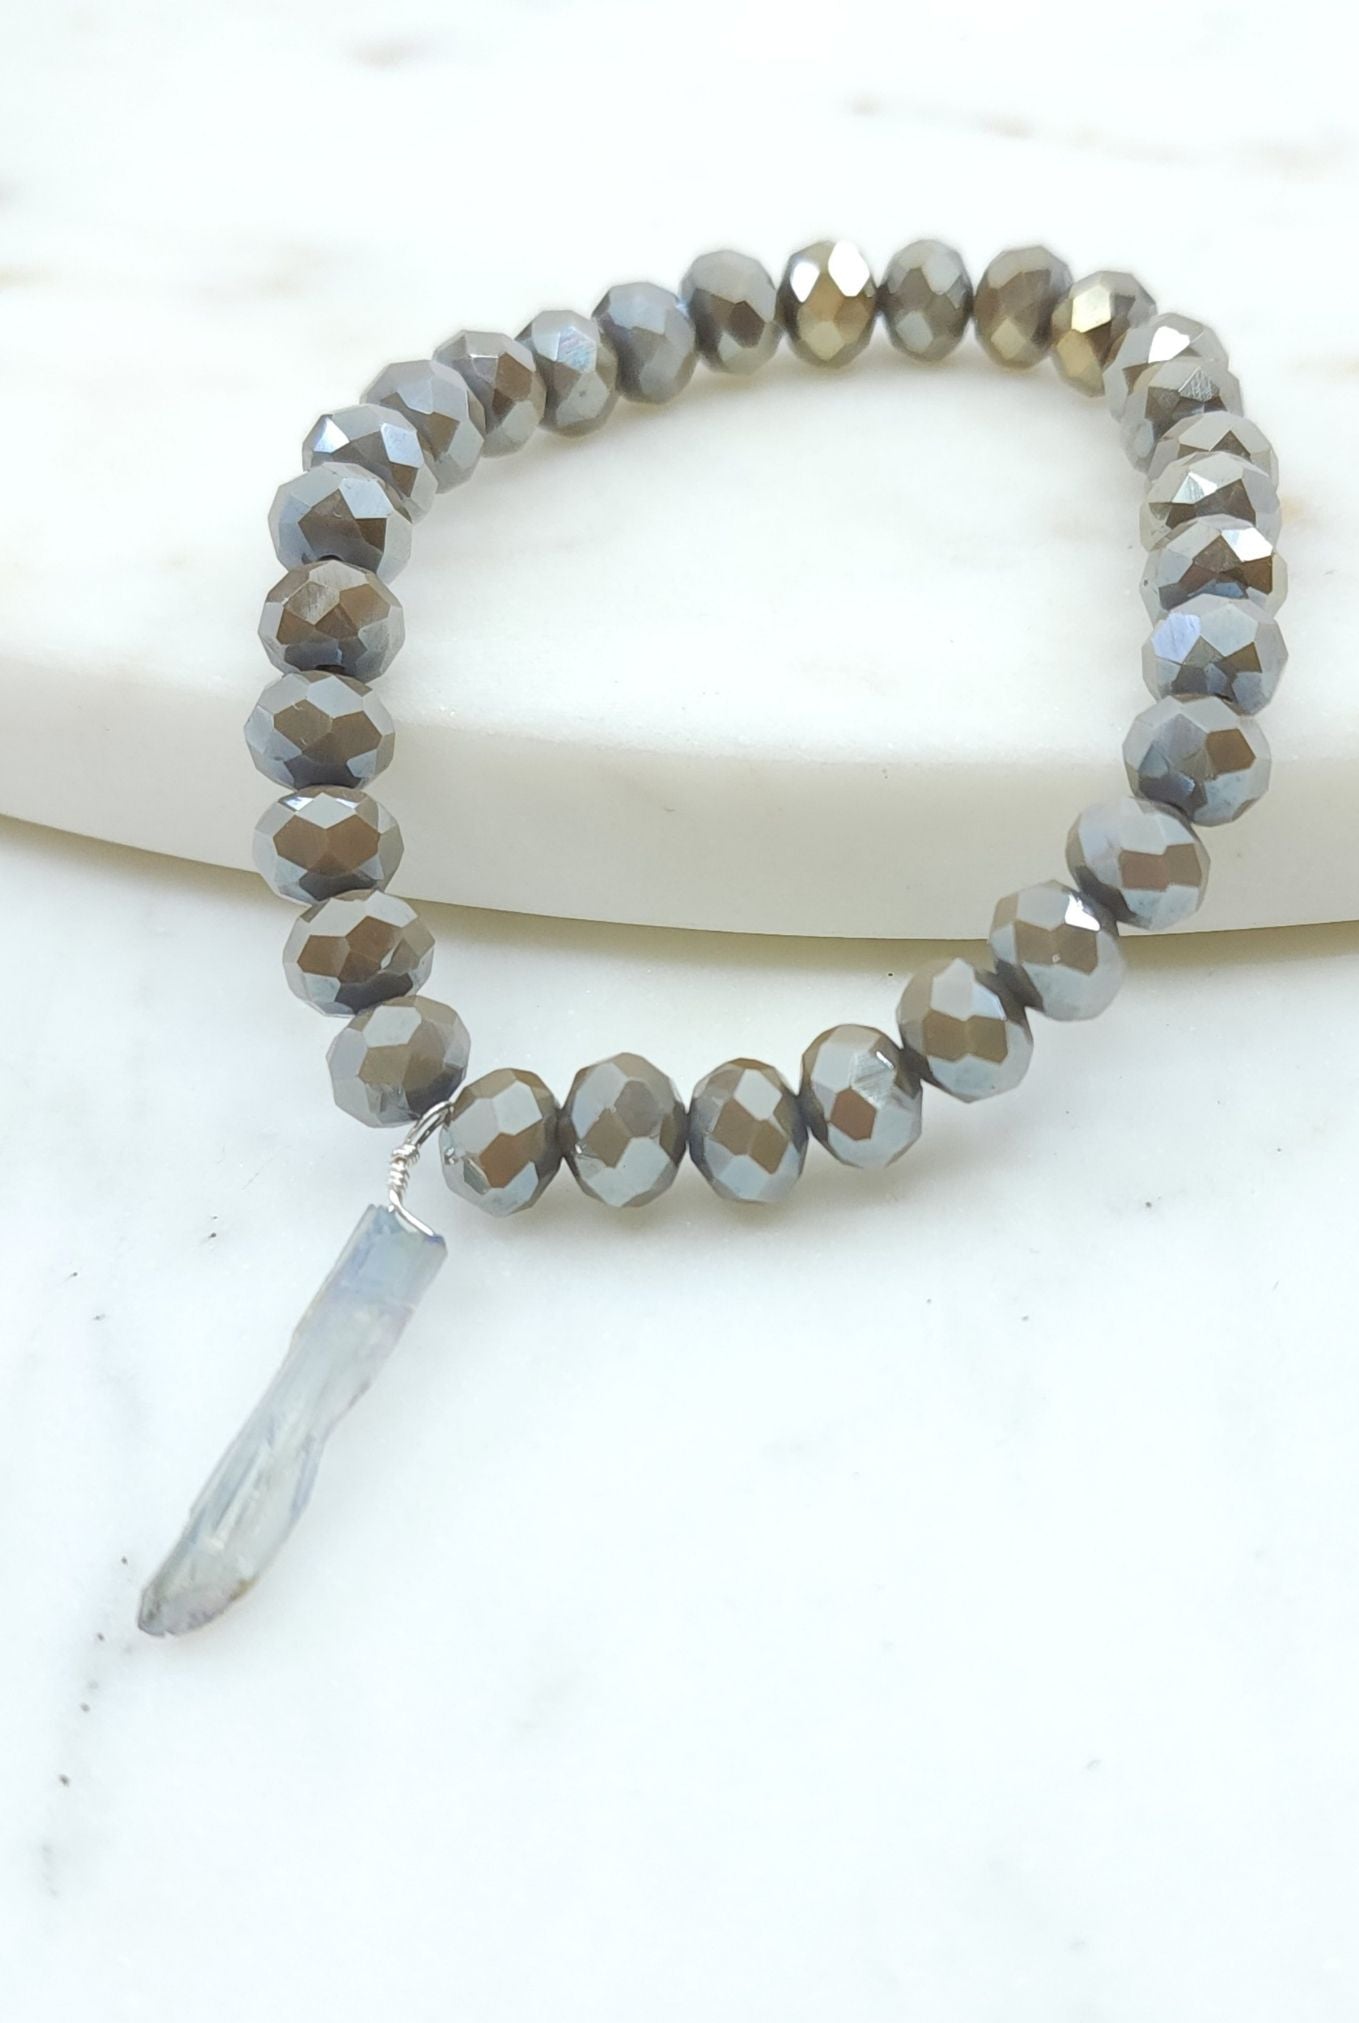 Gold Taupe Bracelet with Grey Titanium Quartz Crystal in Sterling Silver